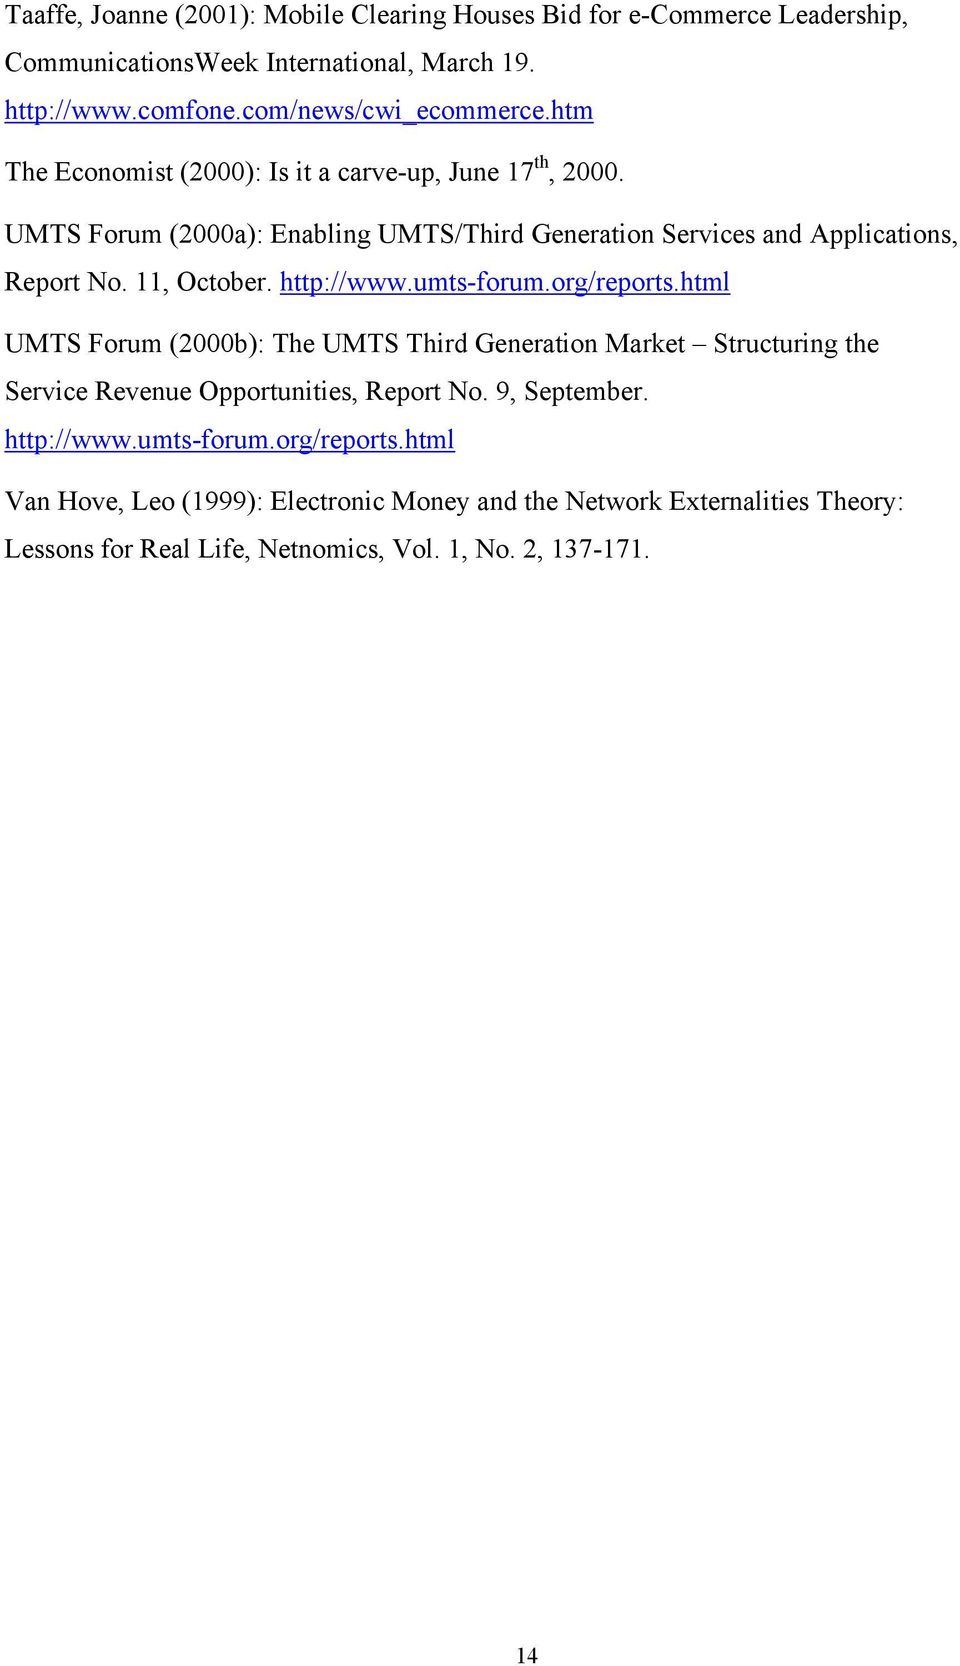 http://www.umts-forum.org/reports.html UMTS Forum (2000b): The UMTS Third Generation Market Structuring the Service Revenue Opportunities, Report No. 9, September.